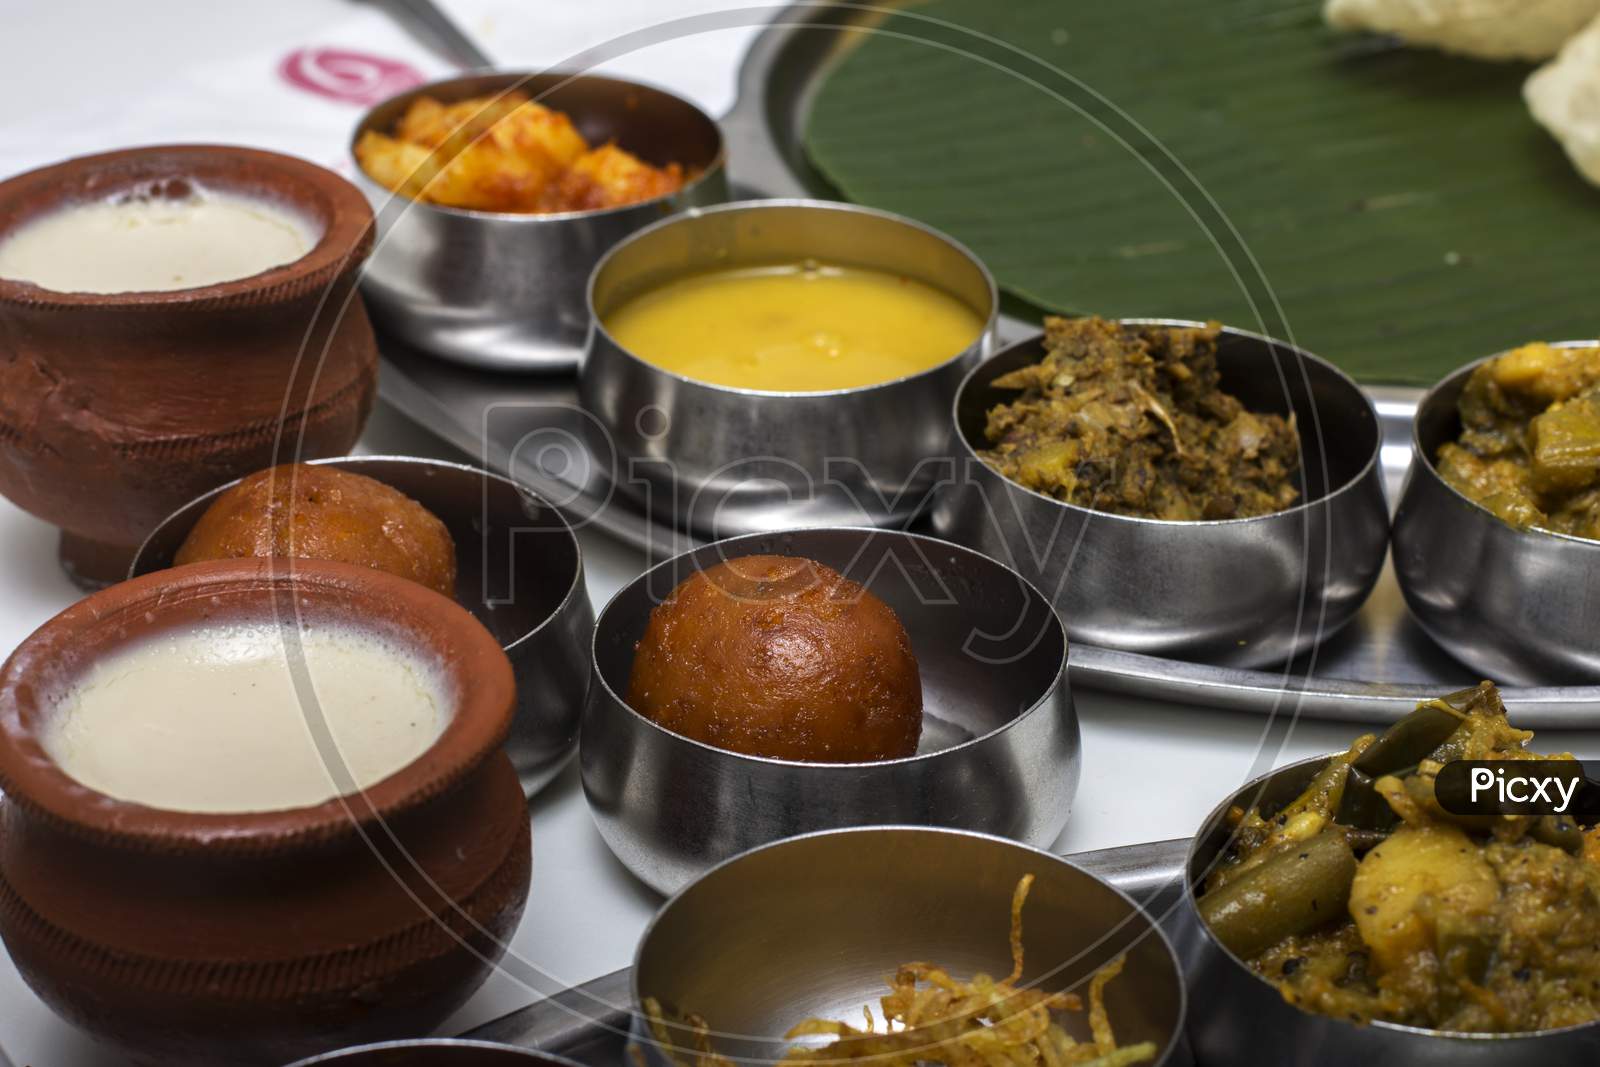 Authentic Delicious Bengali Foods And Desserts